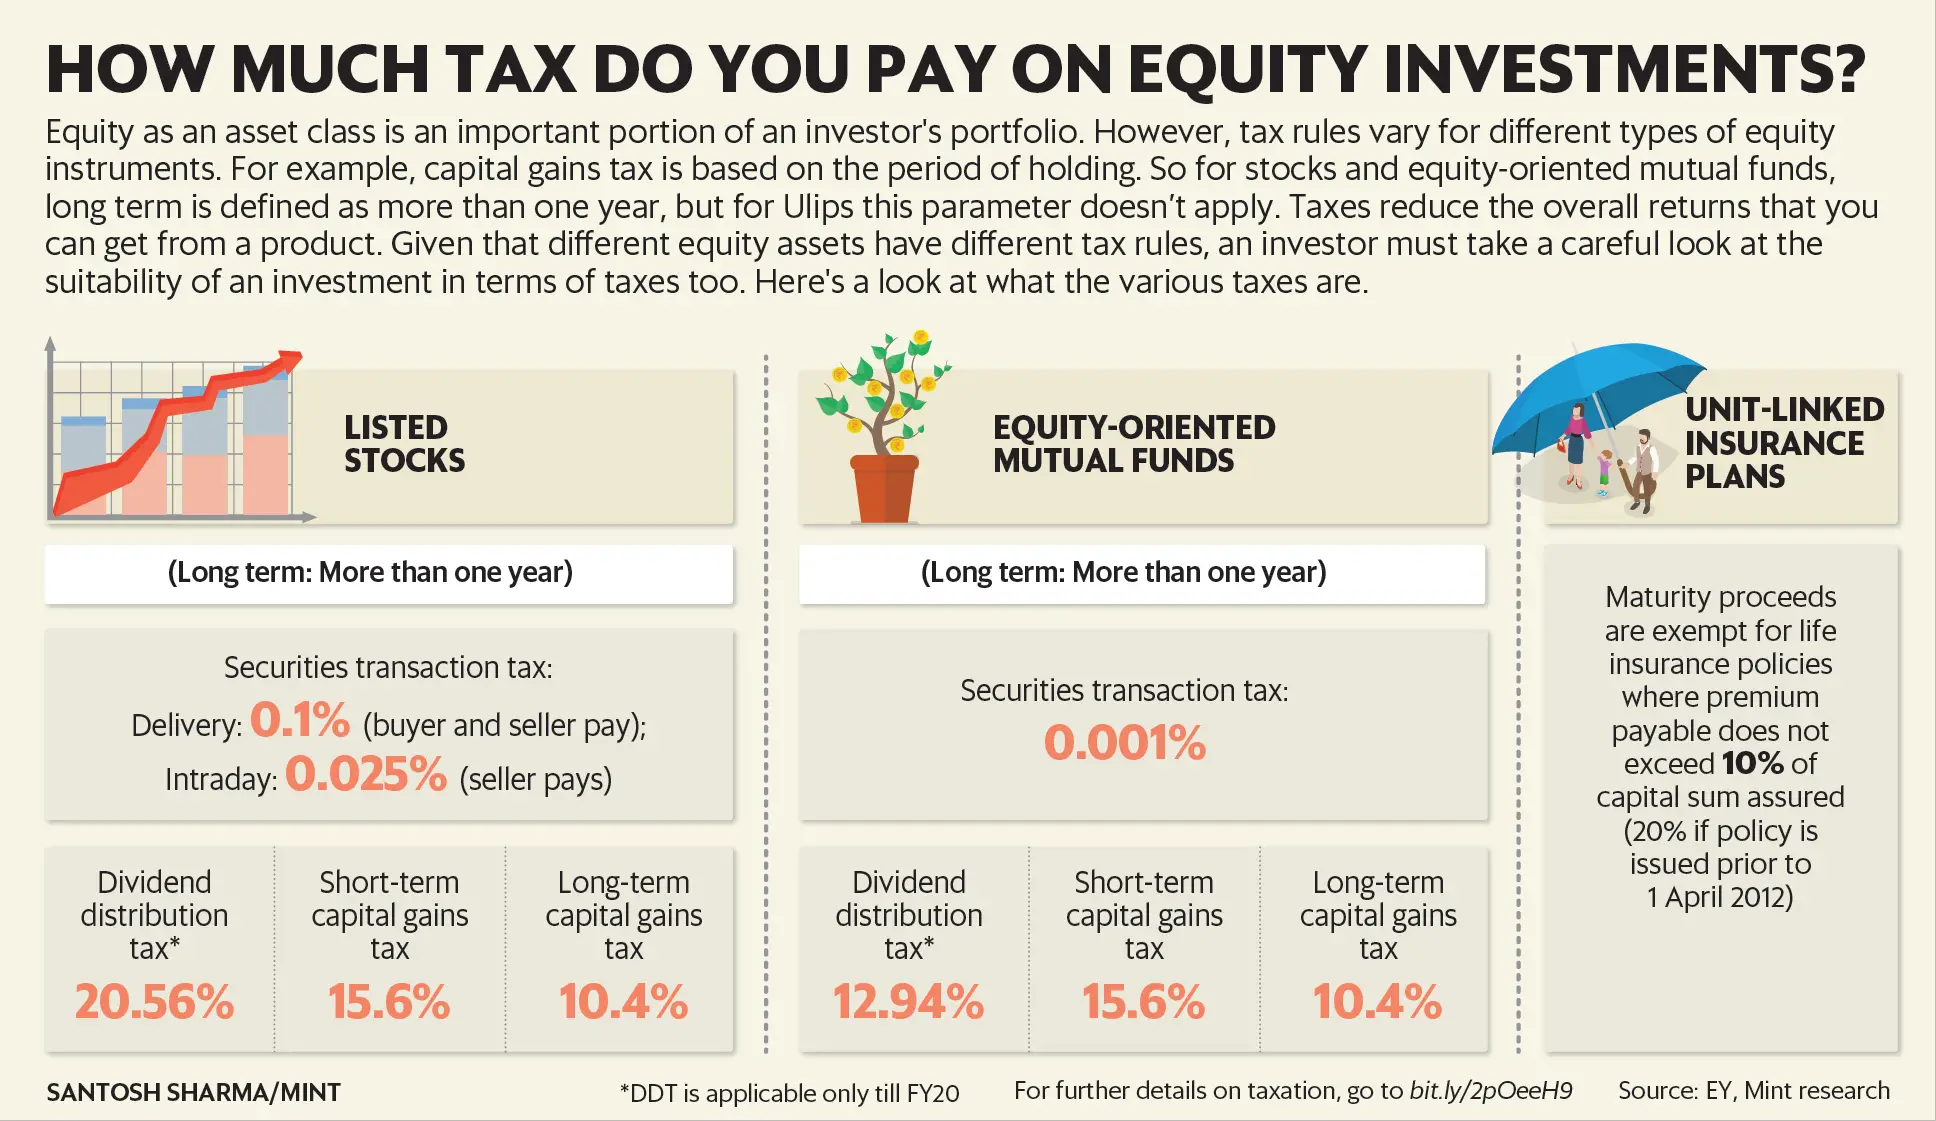 How much tax do you pay on your equity investment